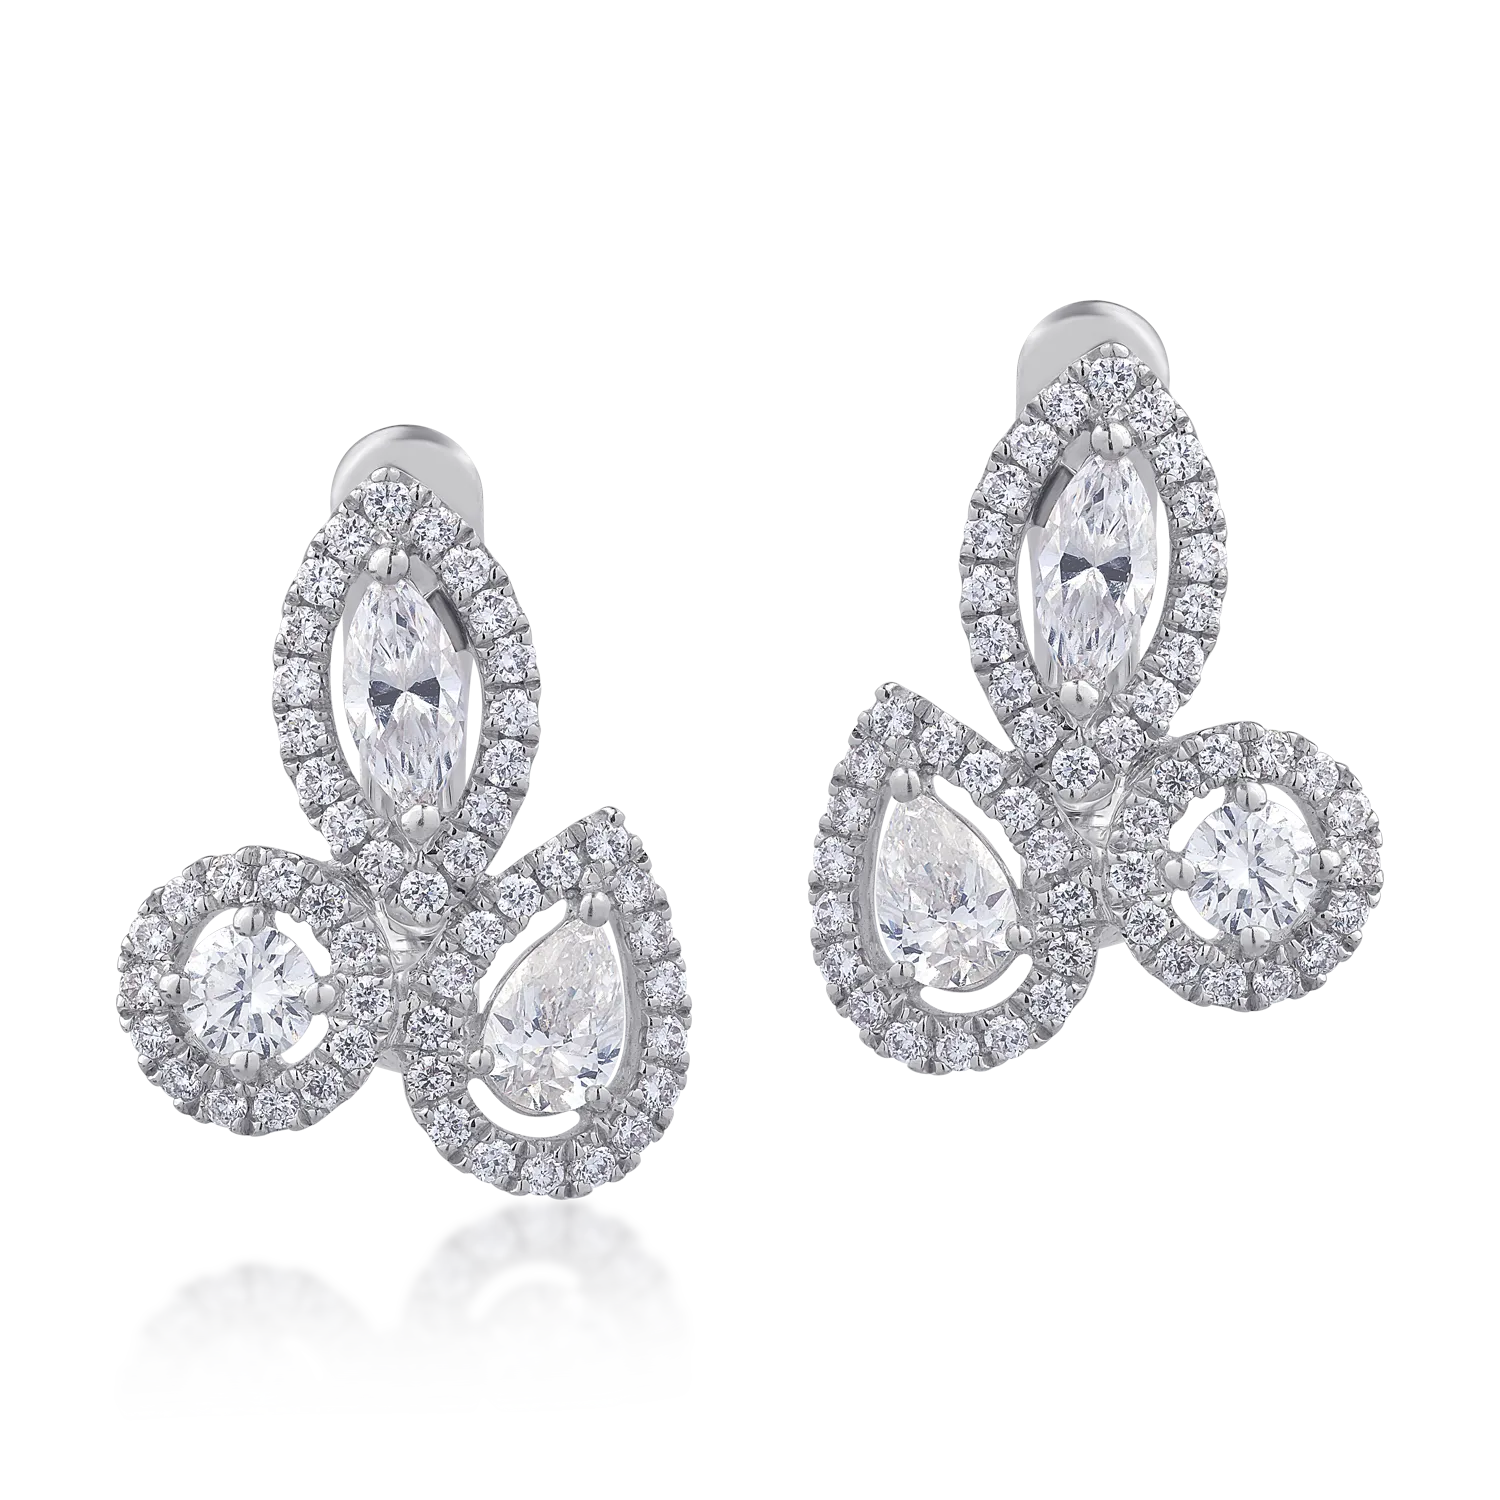 18K white gold earrings with 1.32ct diamonds